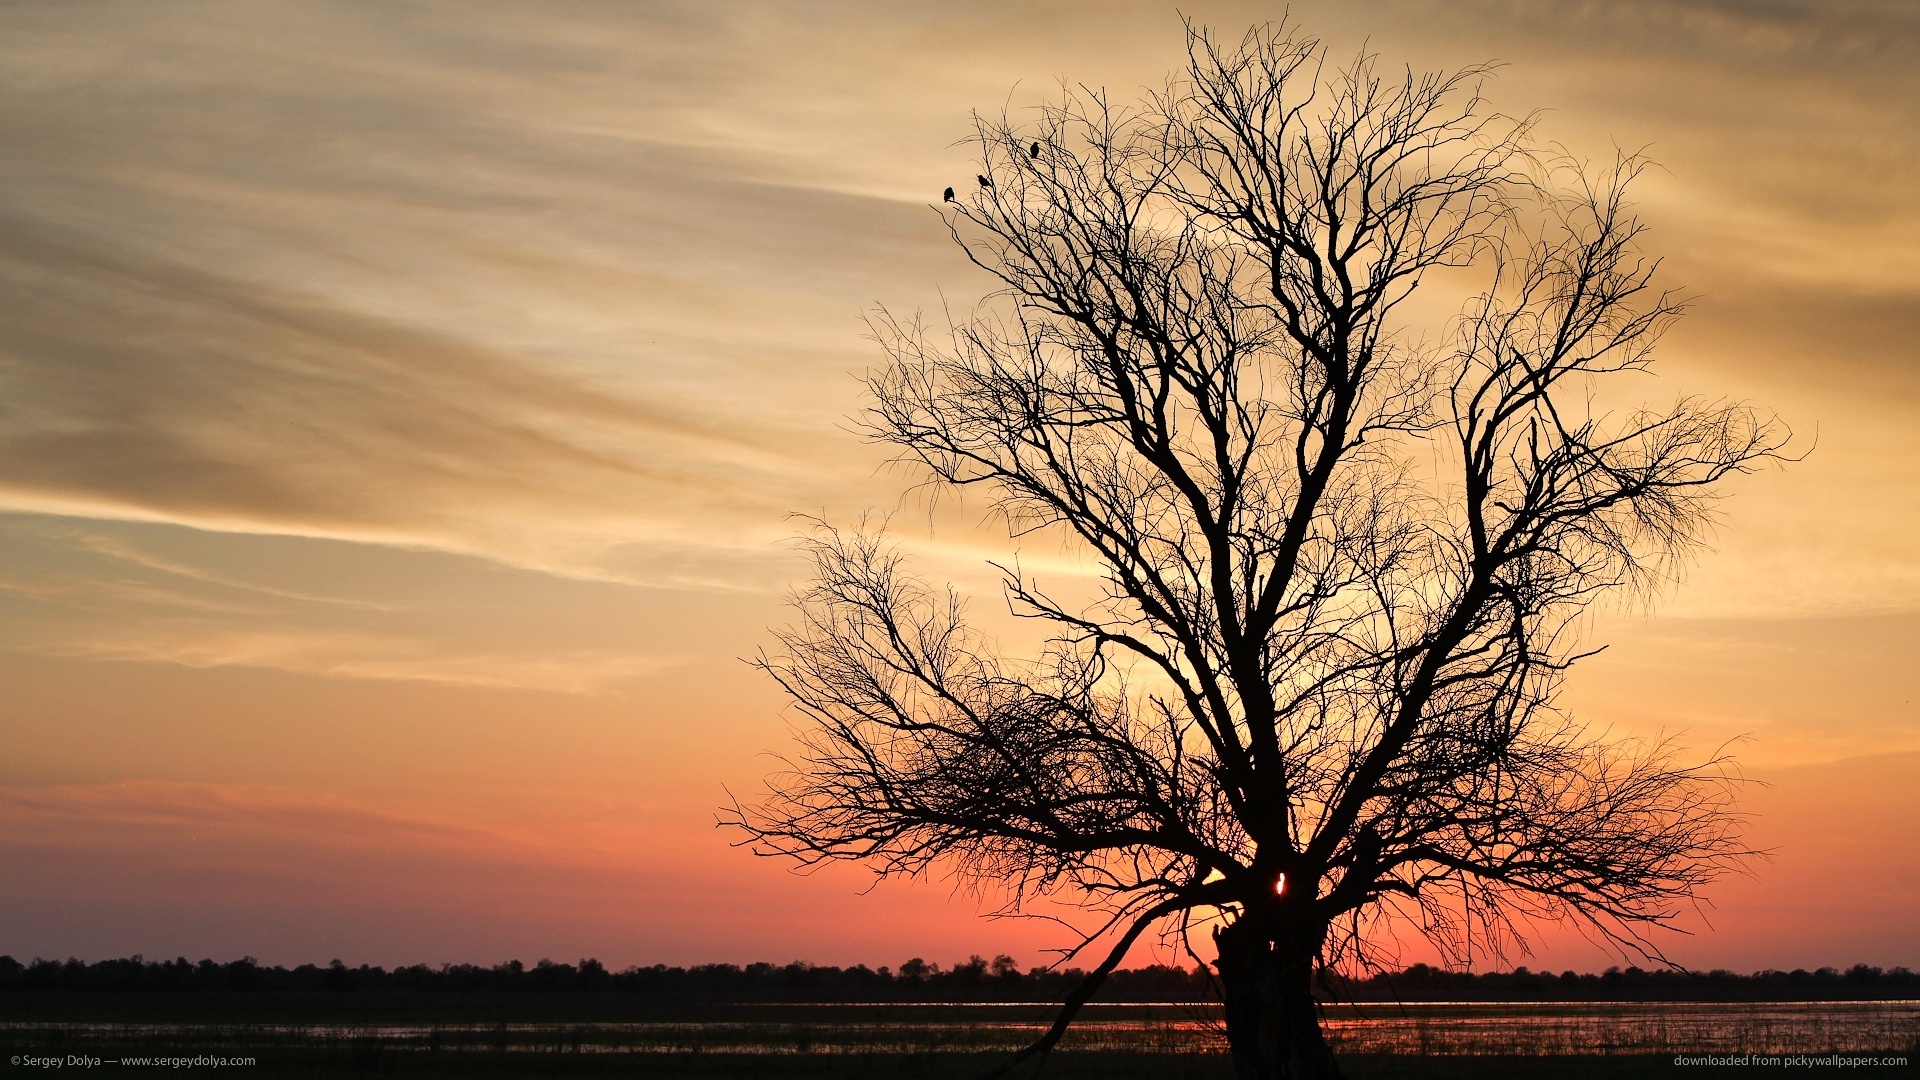 Download 1920x1080 Lone Tree Silhouette In Astrakhan Wallpaper